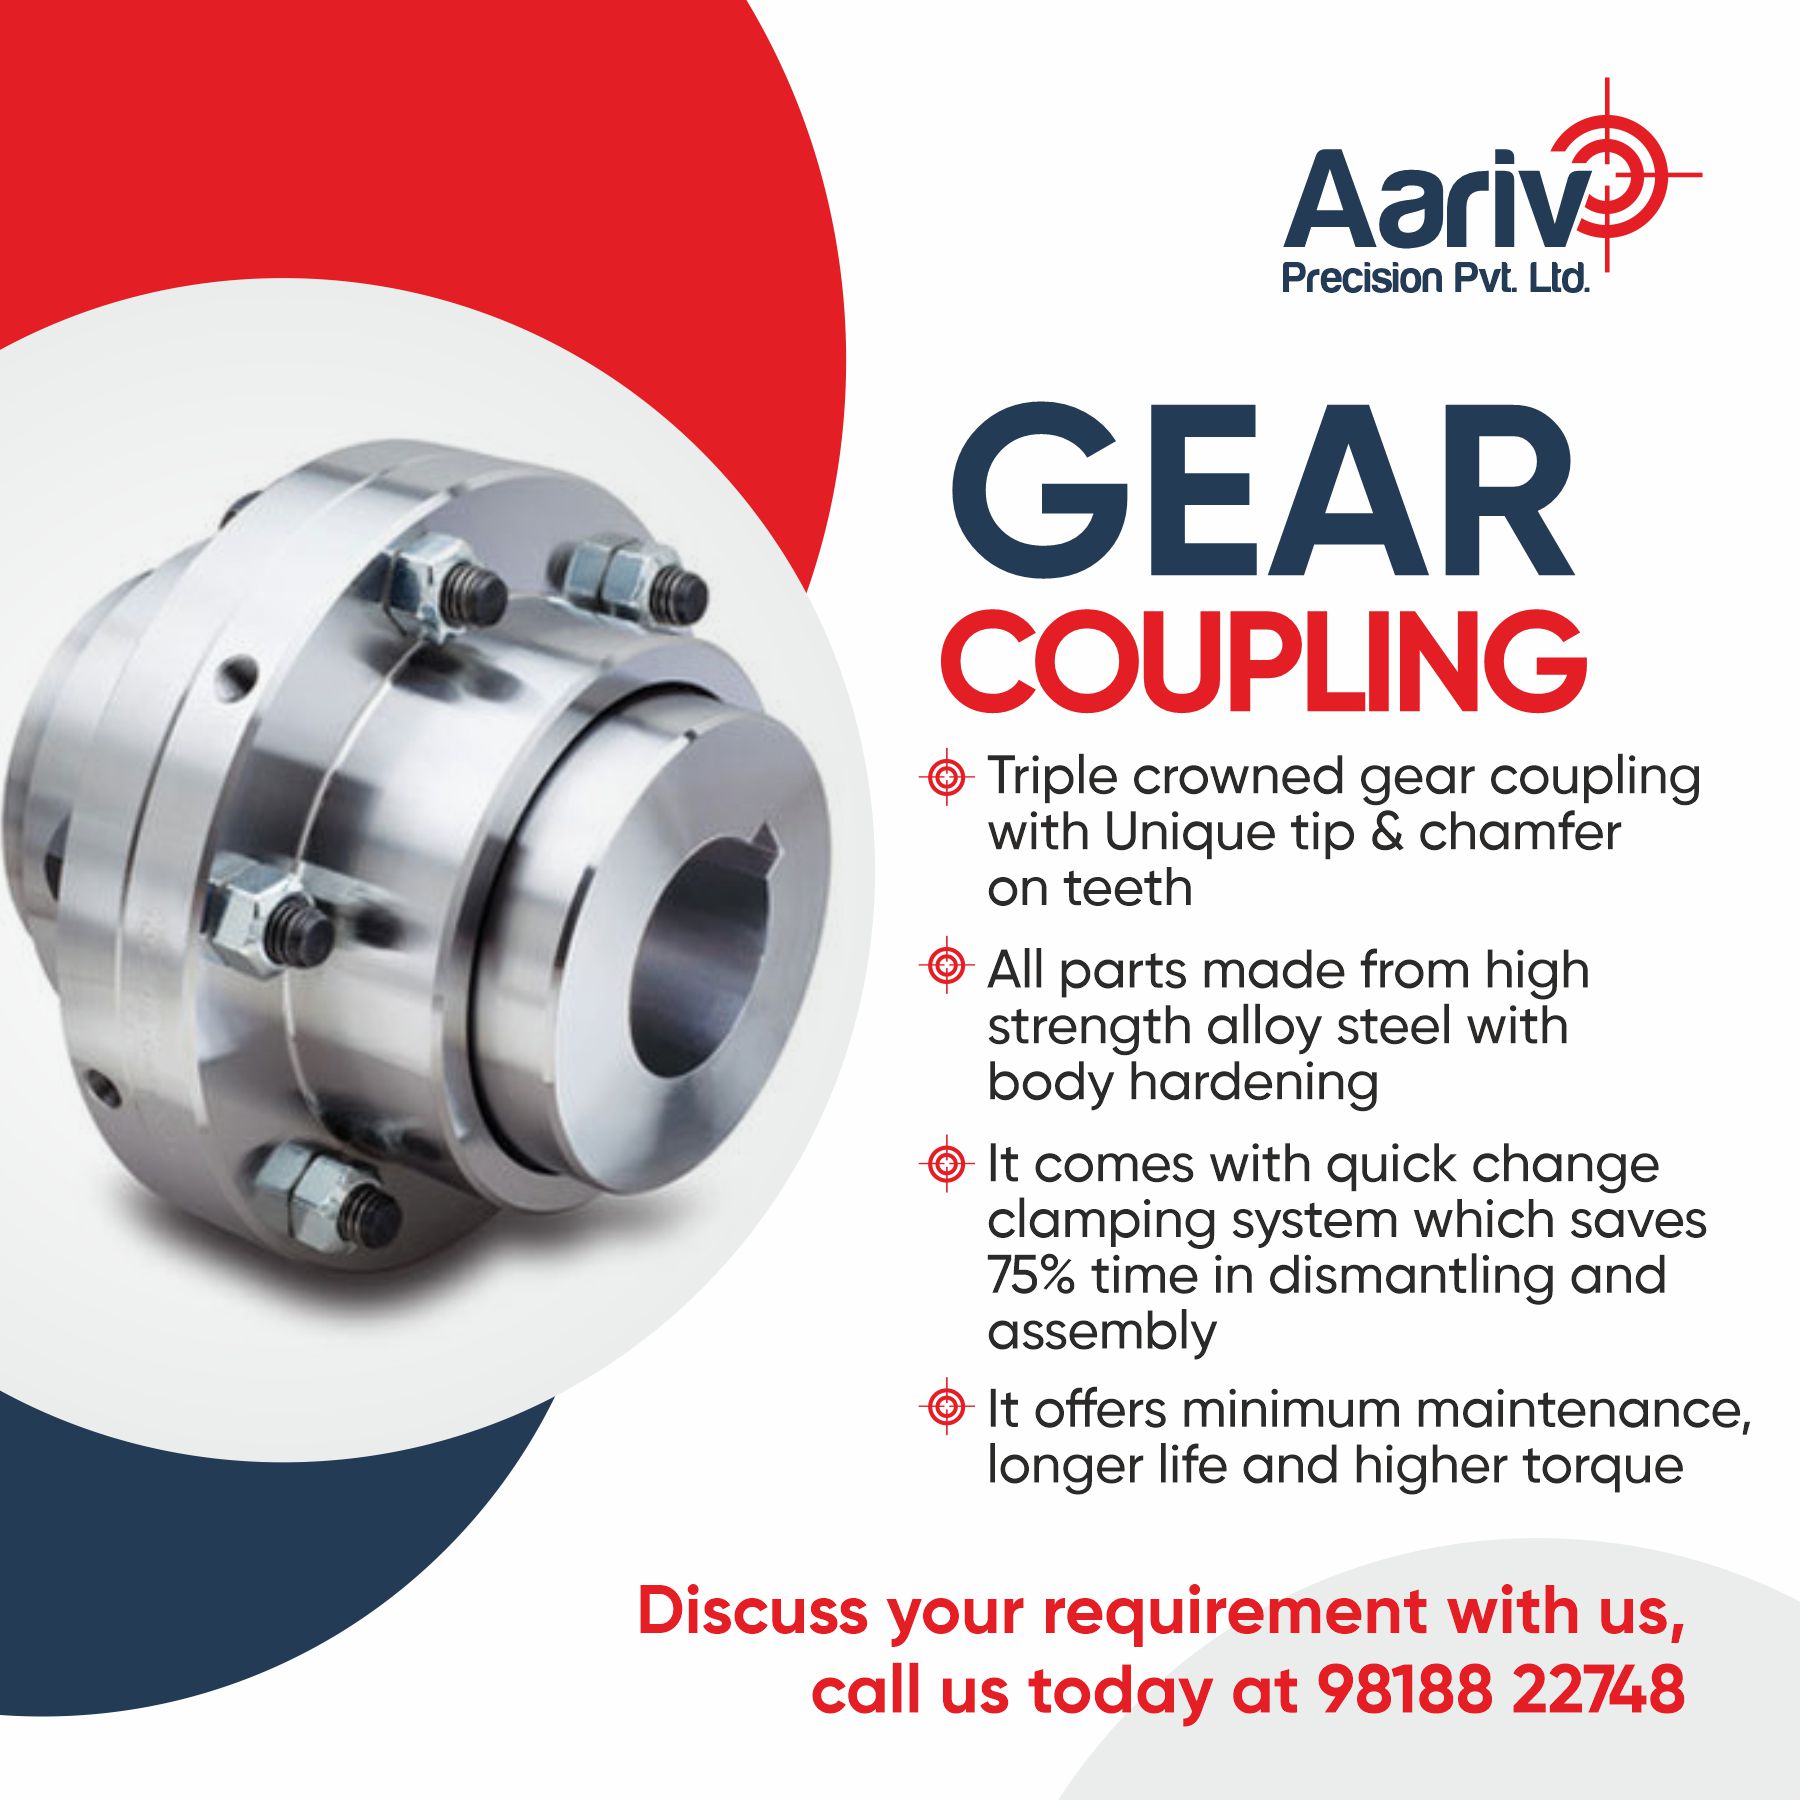 Design and Attributes of Gear Coupling